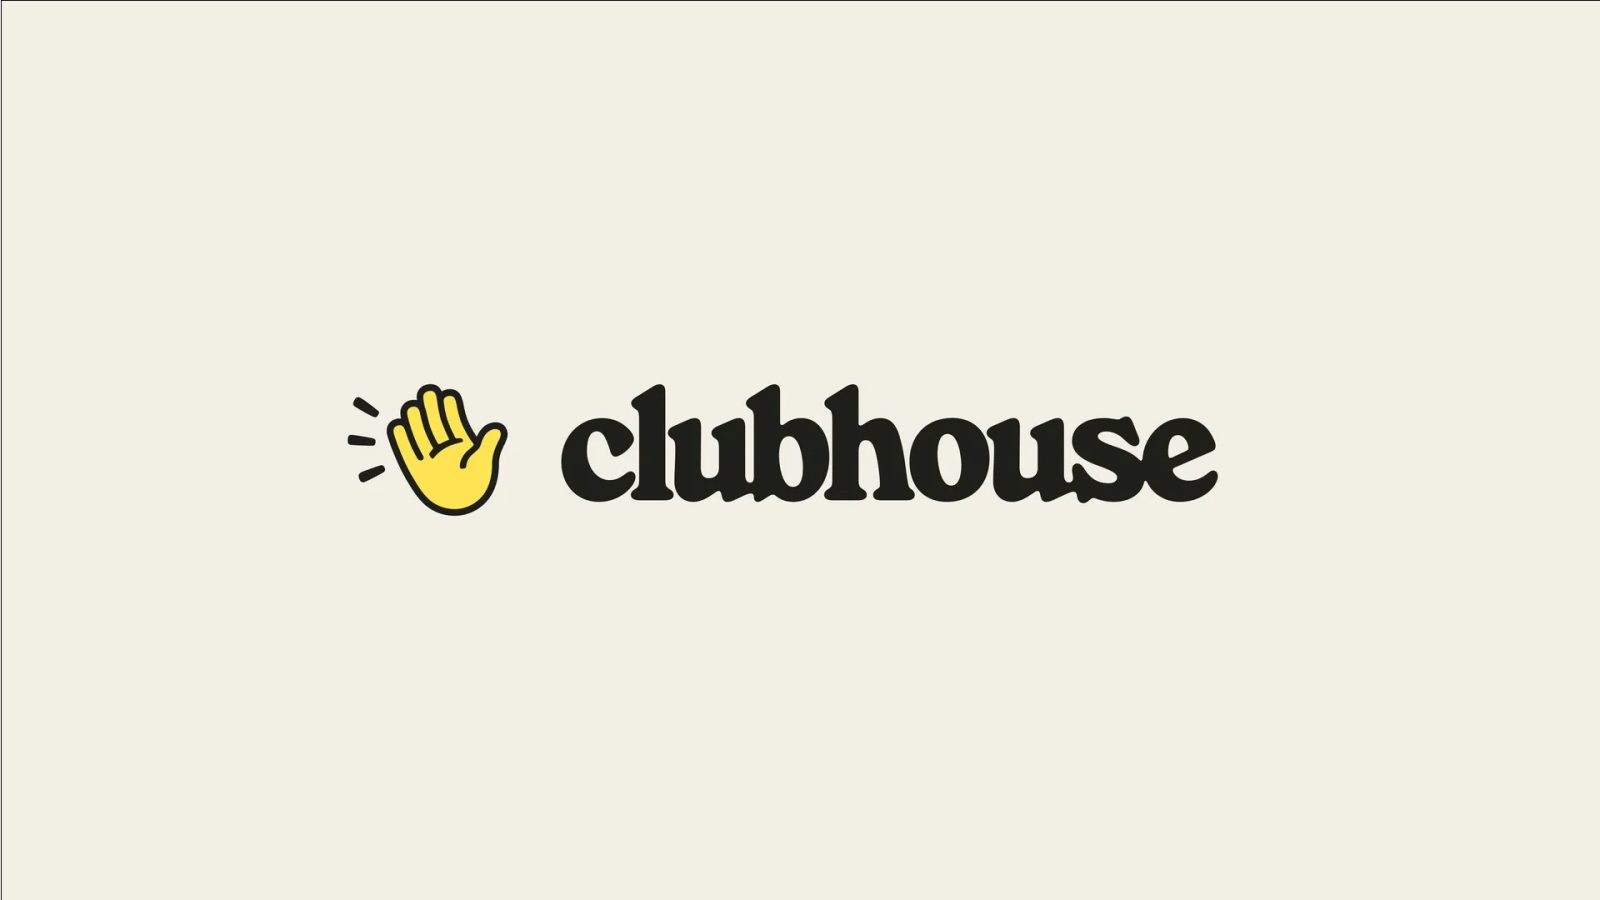 Clubhouse lays off half its employees as platform struggles to stay relevant